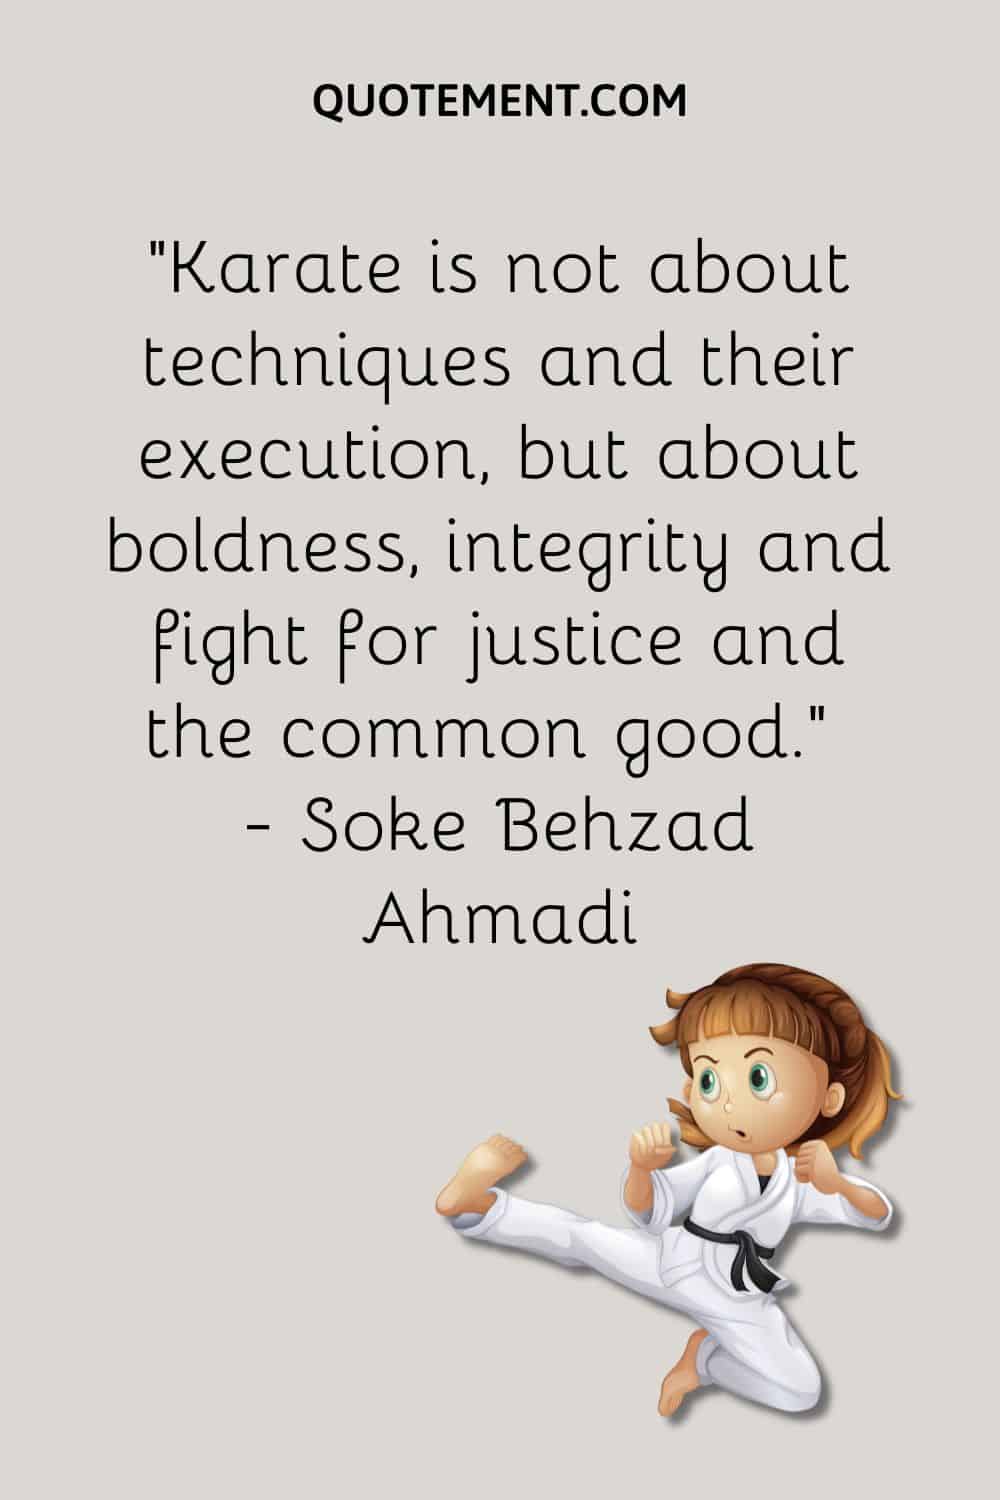 Karate is not about techniques and their execution, but about boldness, integrity and fight for justice and the common good